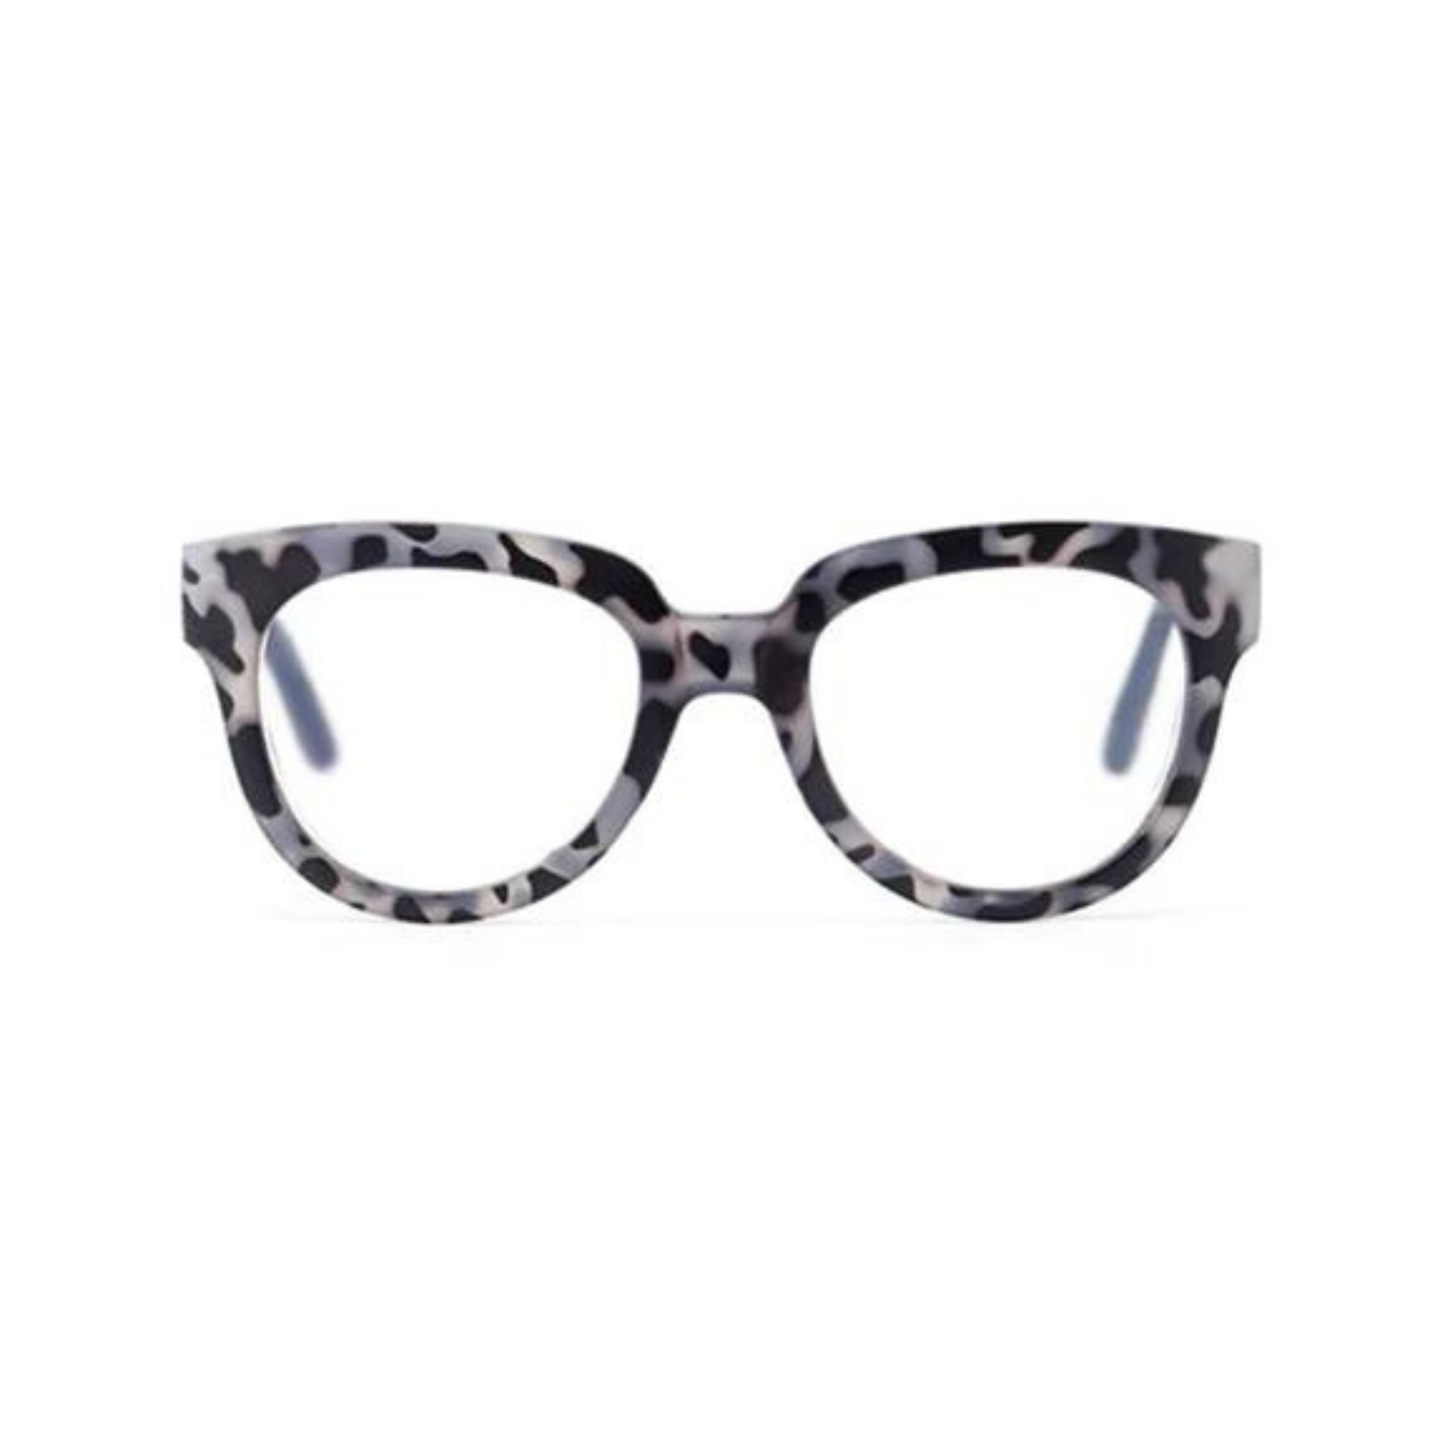 black and clear tortoise print rimmed readers. This style is called New Girl.